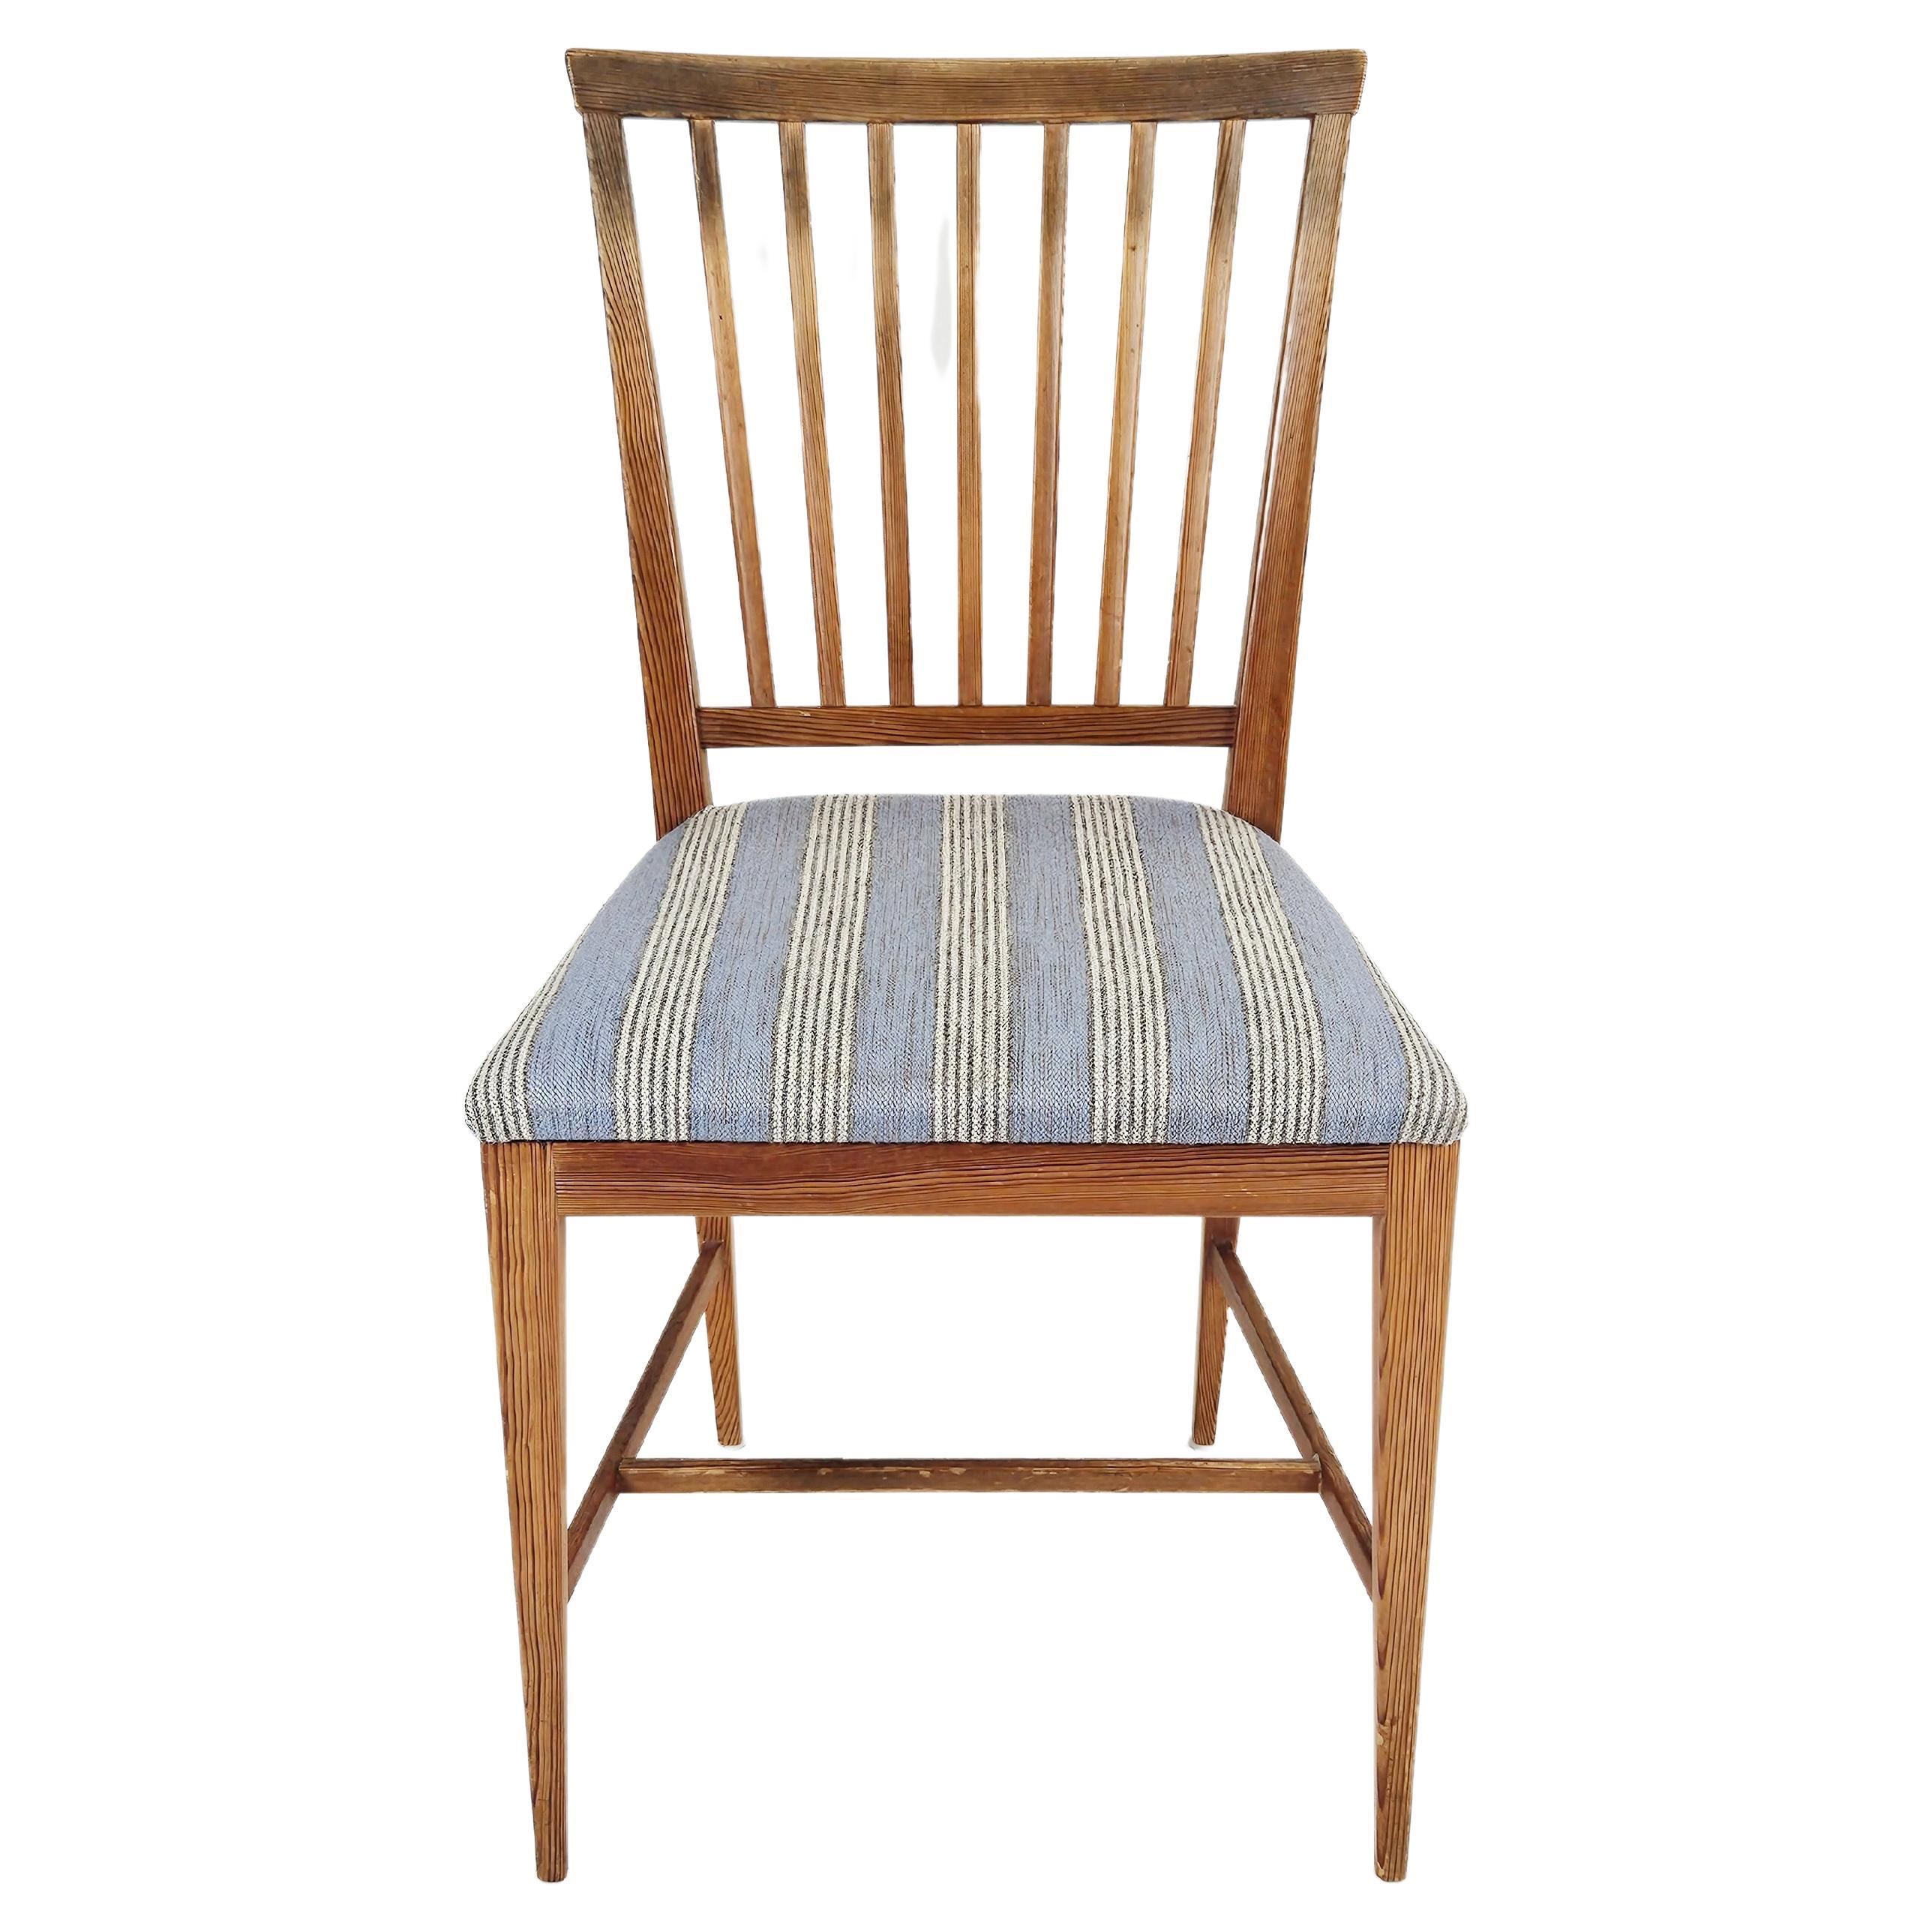 Set of four Swedish midcentury pine dining chairs by Carl Malmsten